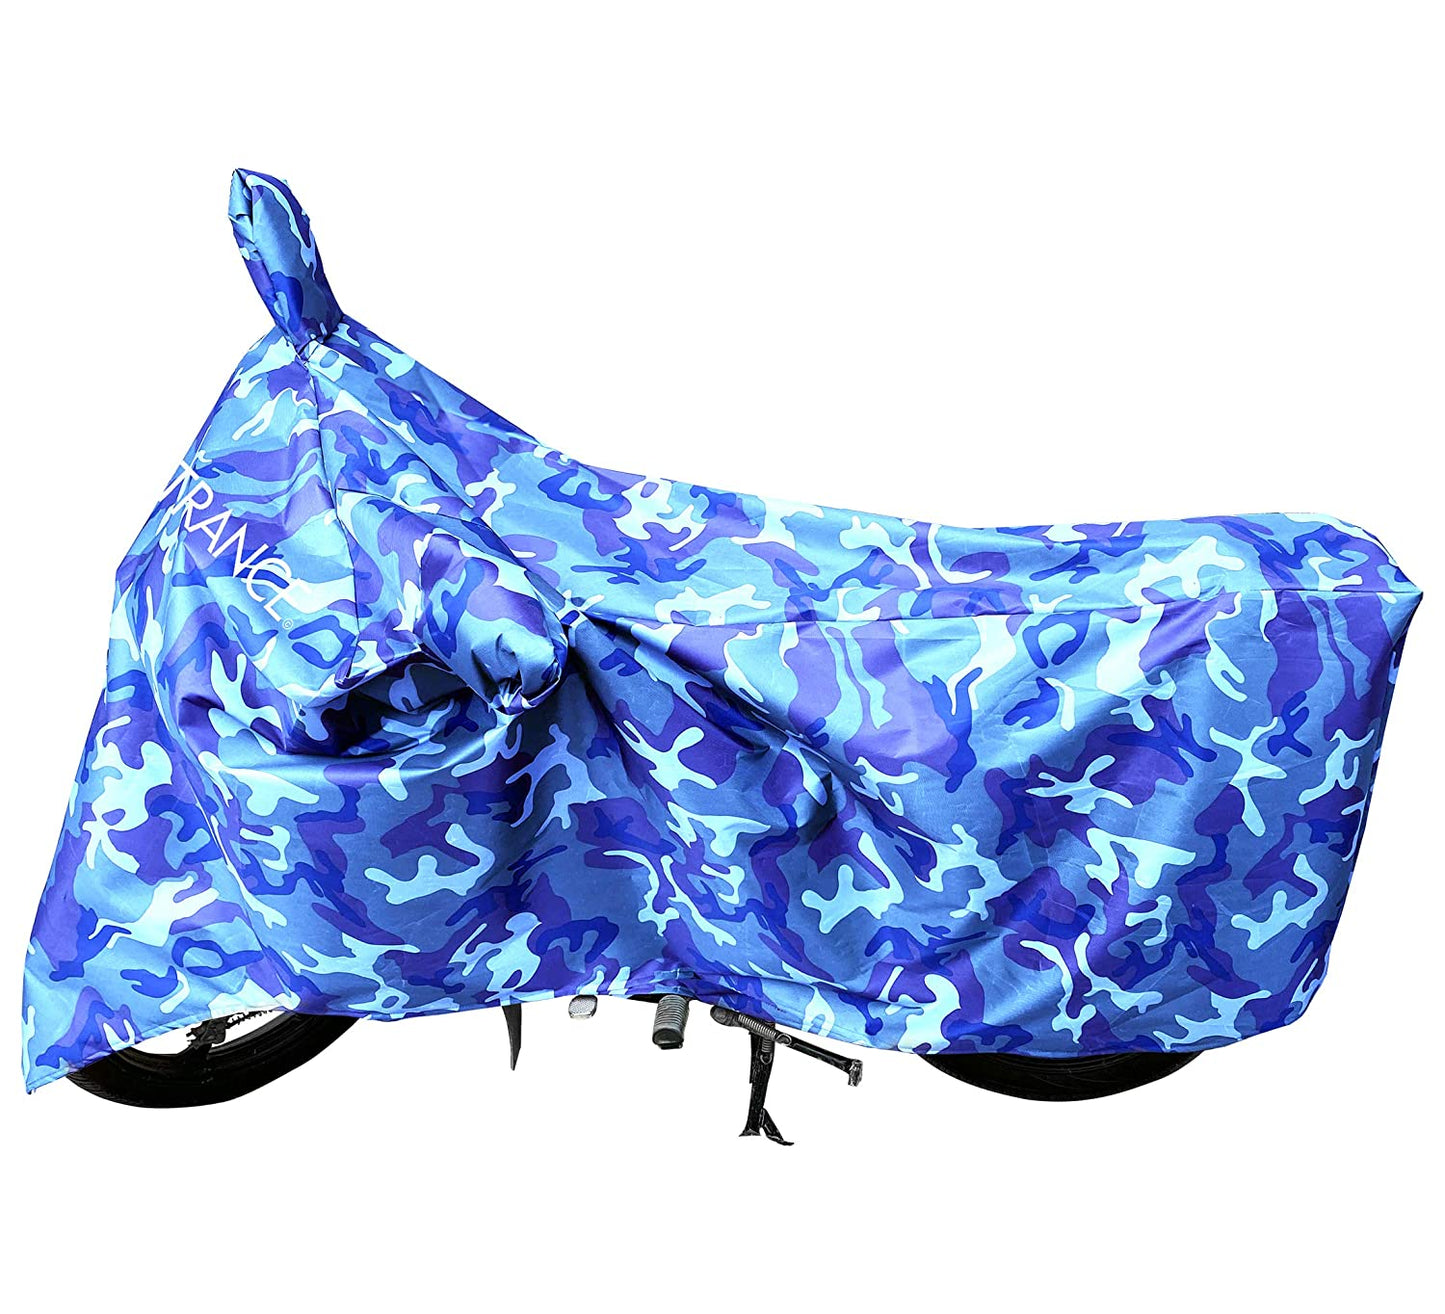 MotoTrance Jungle Bike Body Covers For SuzukiÂ  Gixxer 250 2019 - Interlock-Stitched Waterproof and Heat Resistant with Mirror Pockets